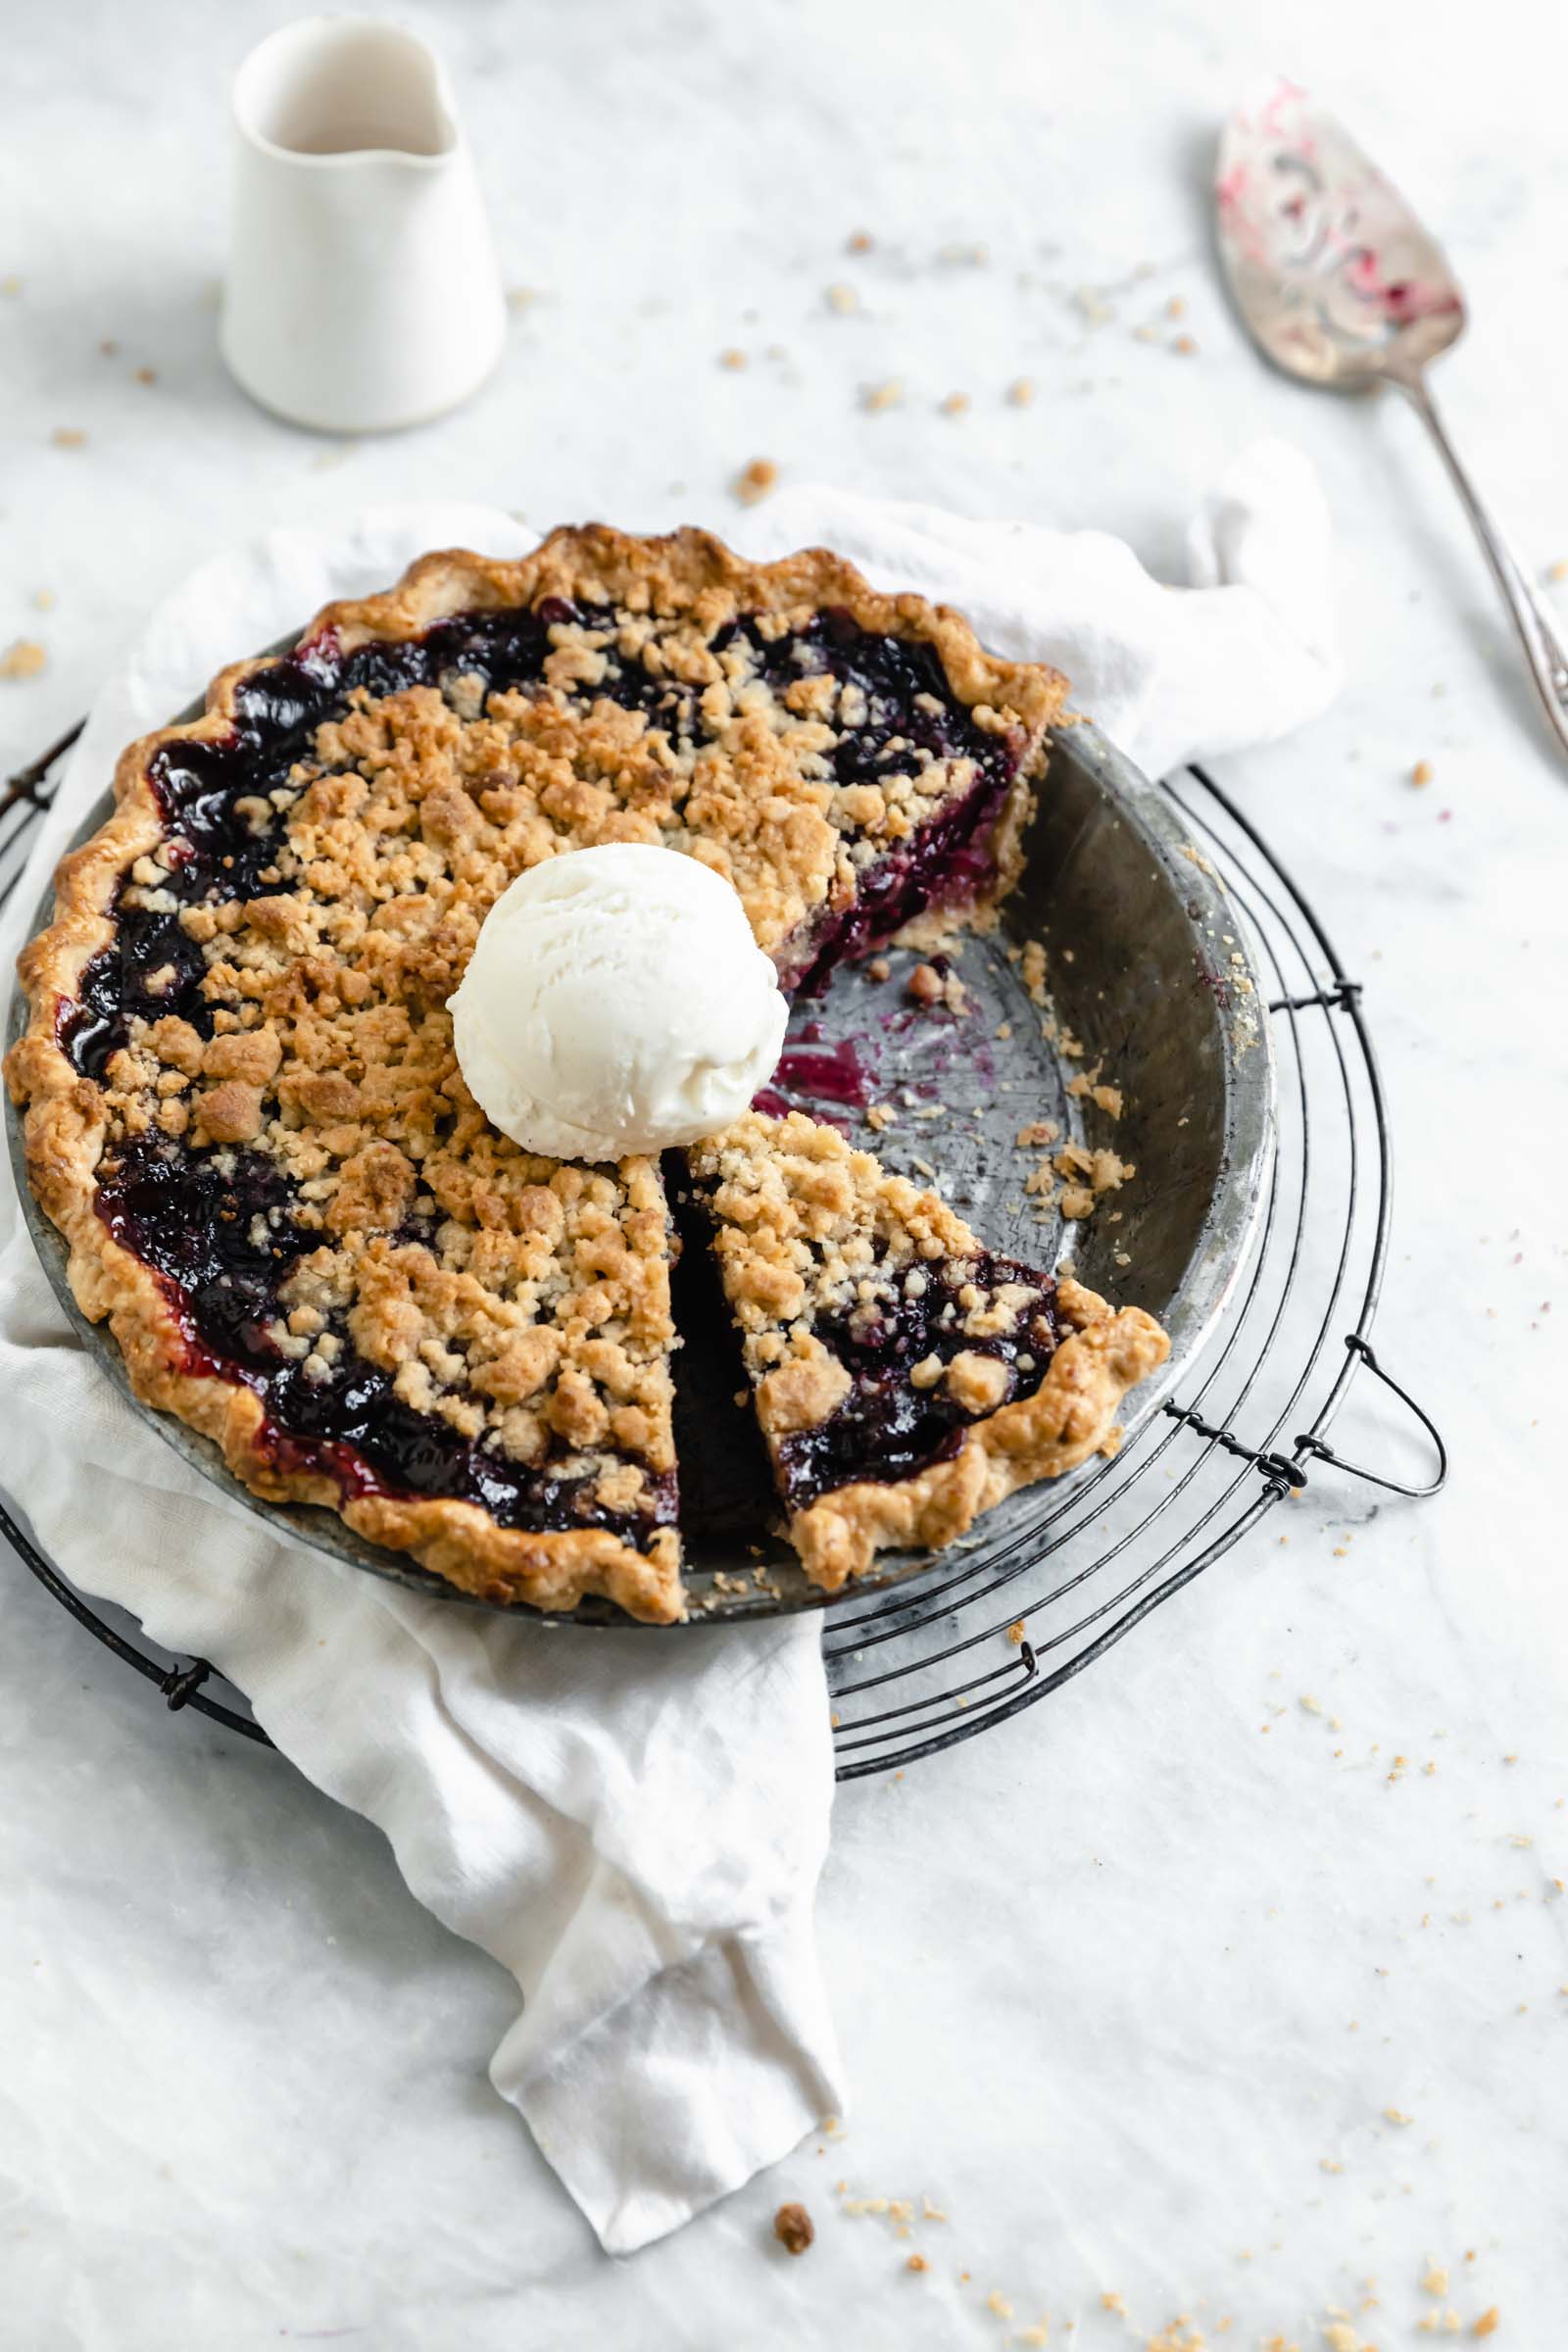 cherry pie with crumble topping and a scoop of ice cream